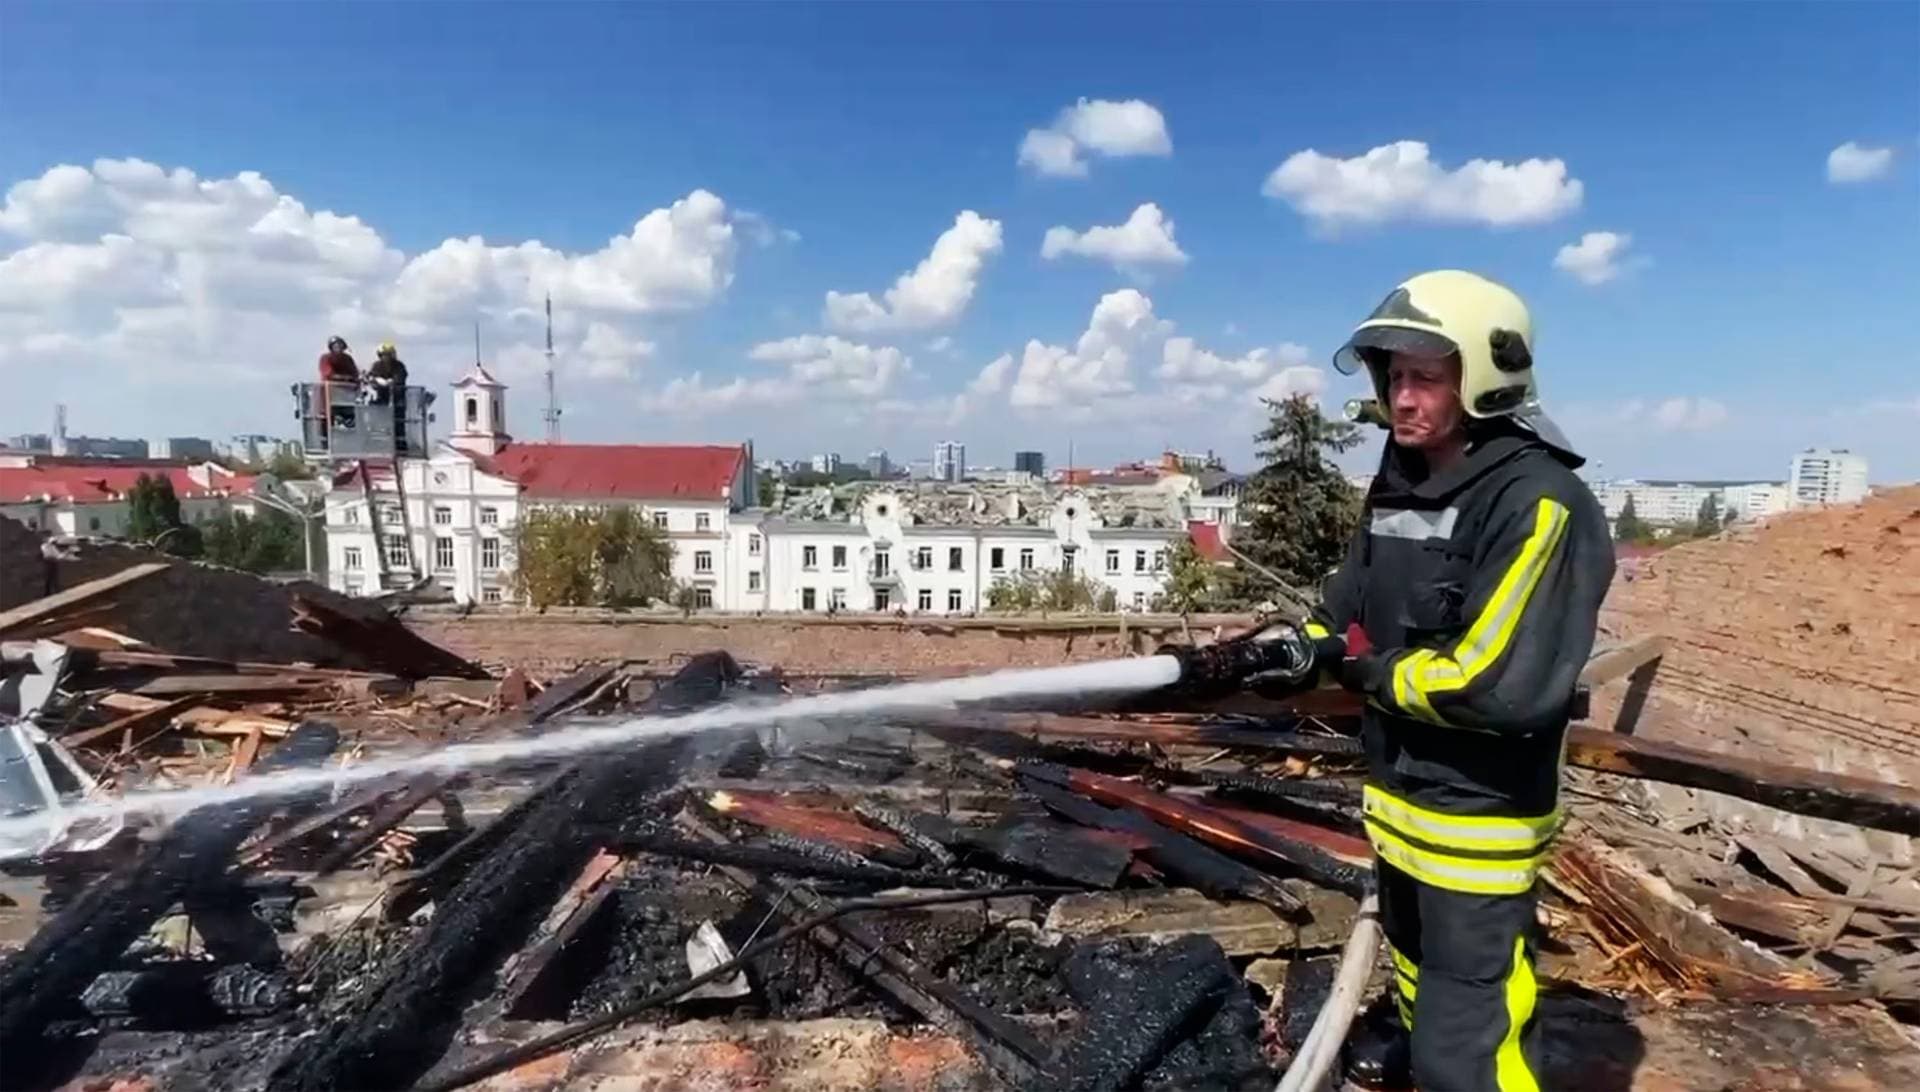 firefighters work on a roof of the Taras Shevchenko Chernihiv Regional Academic Music and Drama Theatre damaged by Russian attack in Chernihiv